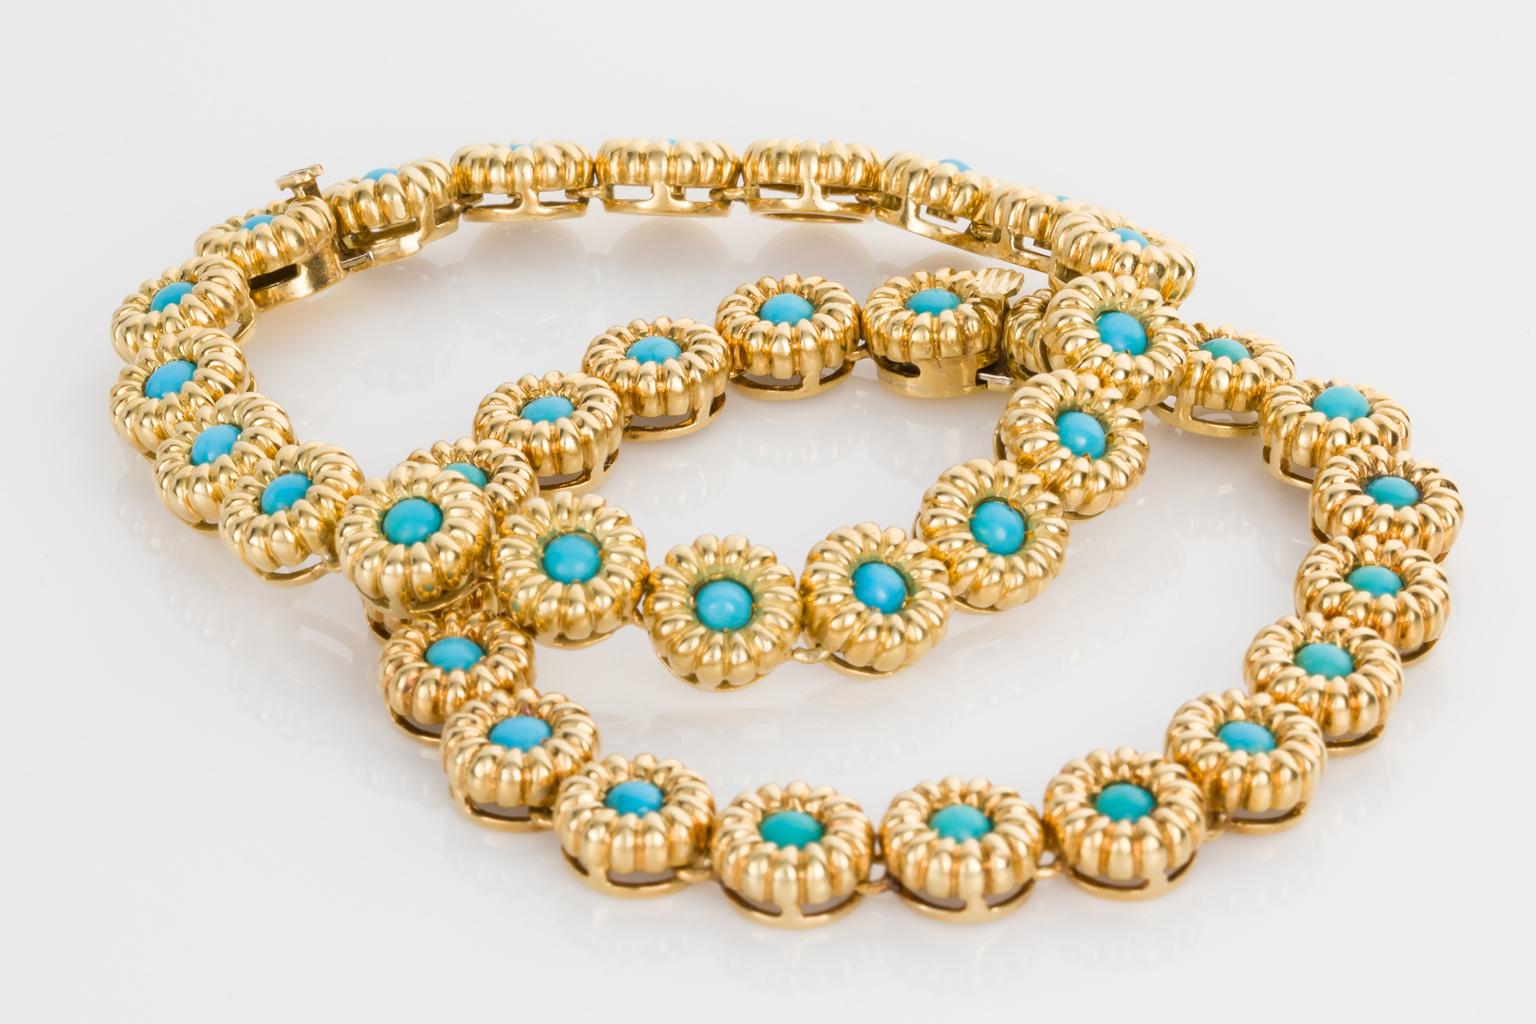 18 Karat Yellow Gold Turquoise Bracelets or Choker Necklace For Sale 3